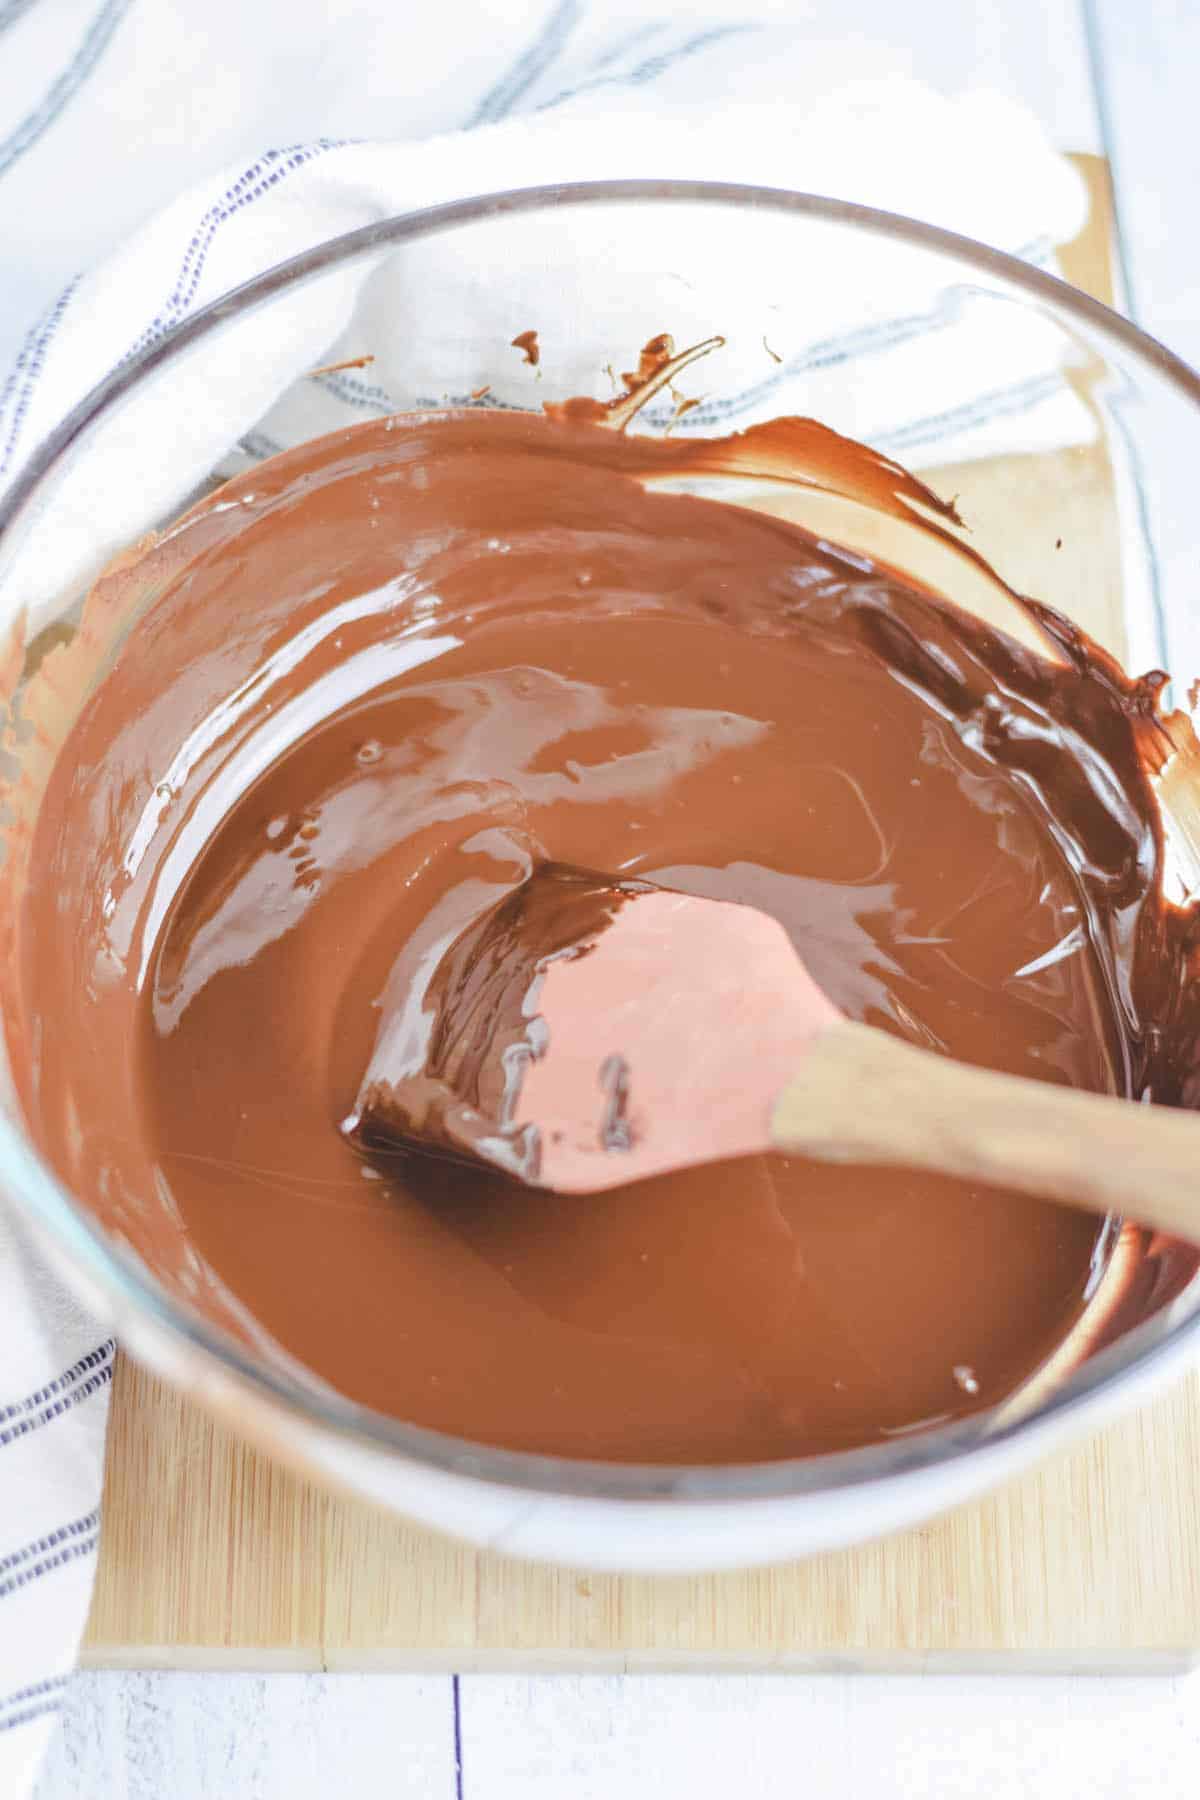 melting the dark chocolate bars in the glass bowl with a spatula